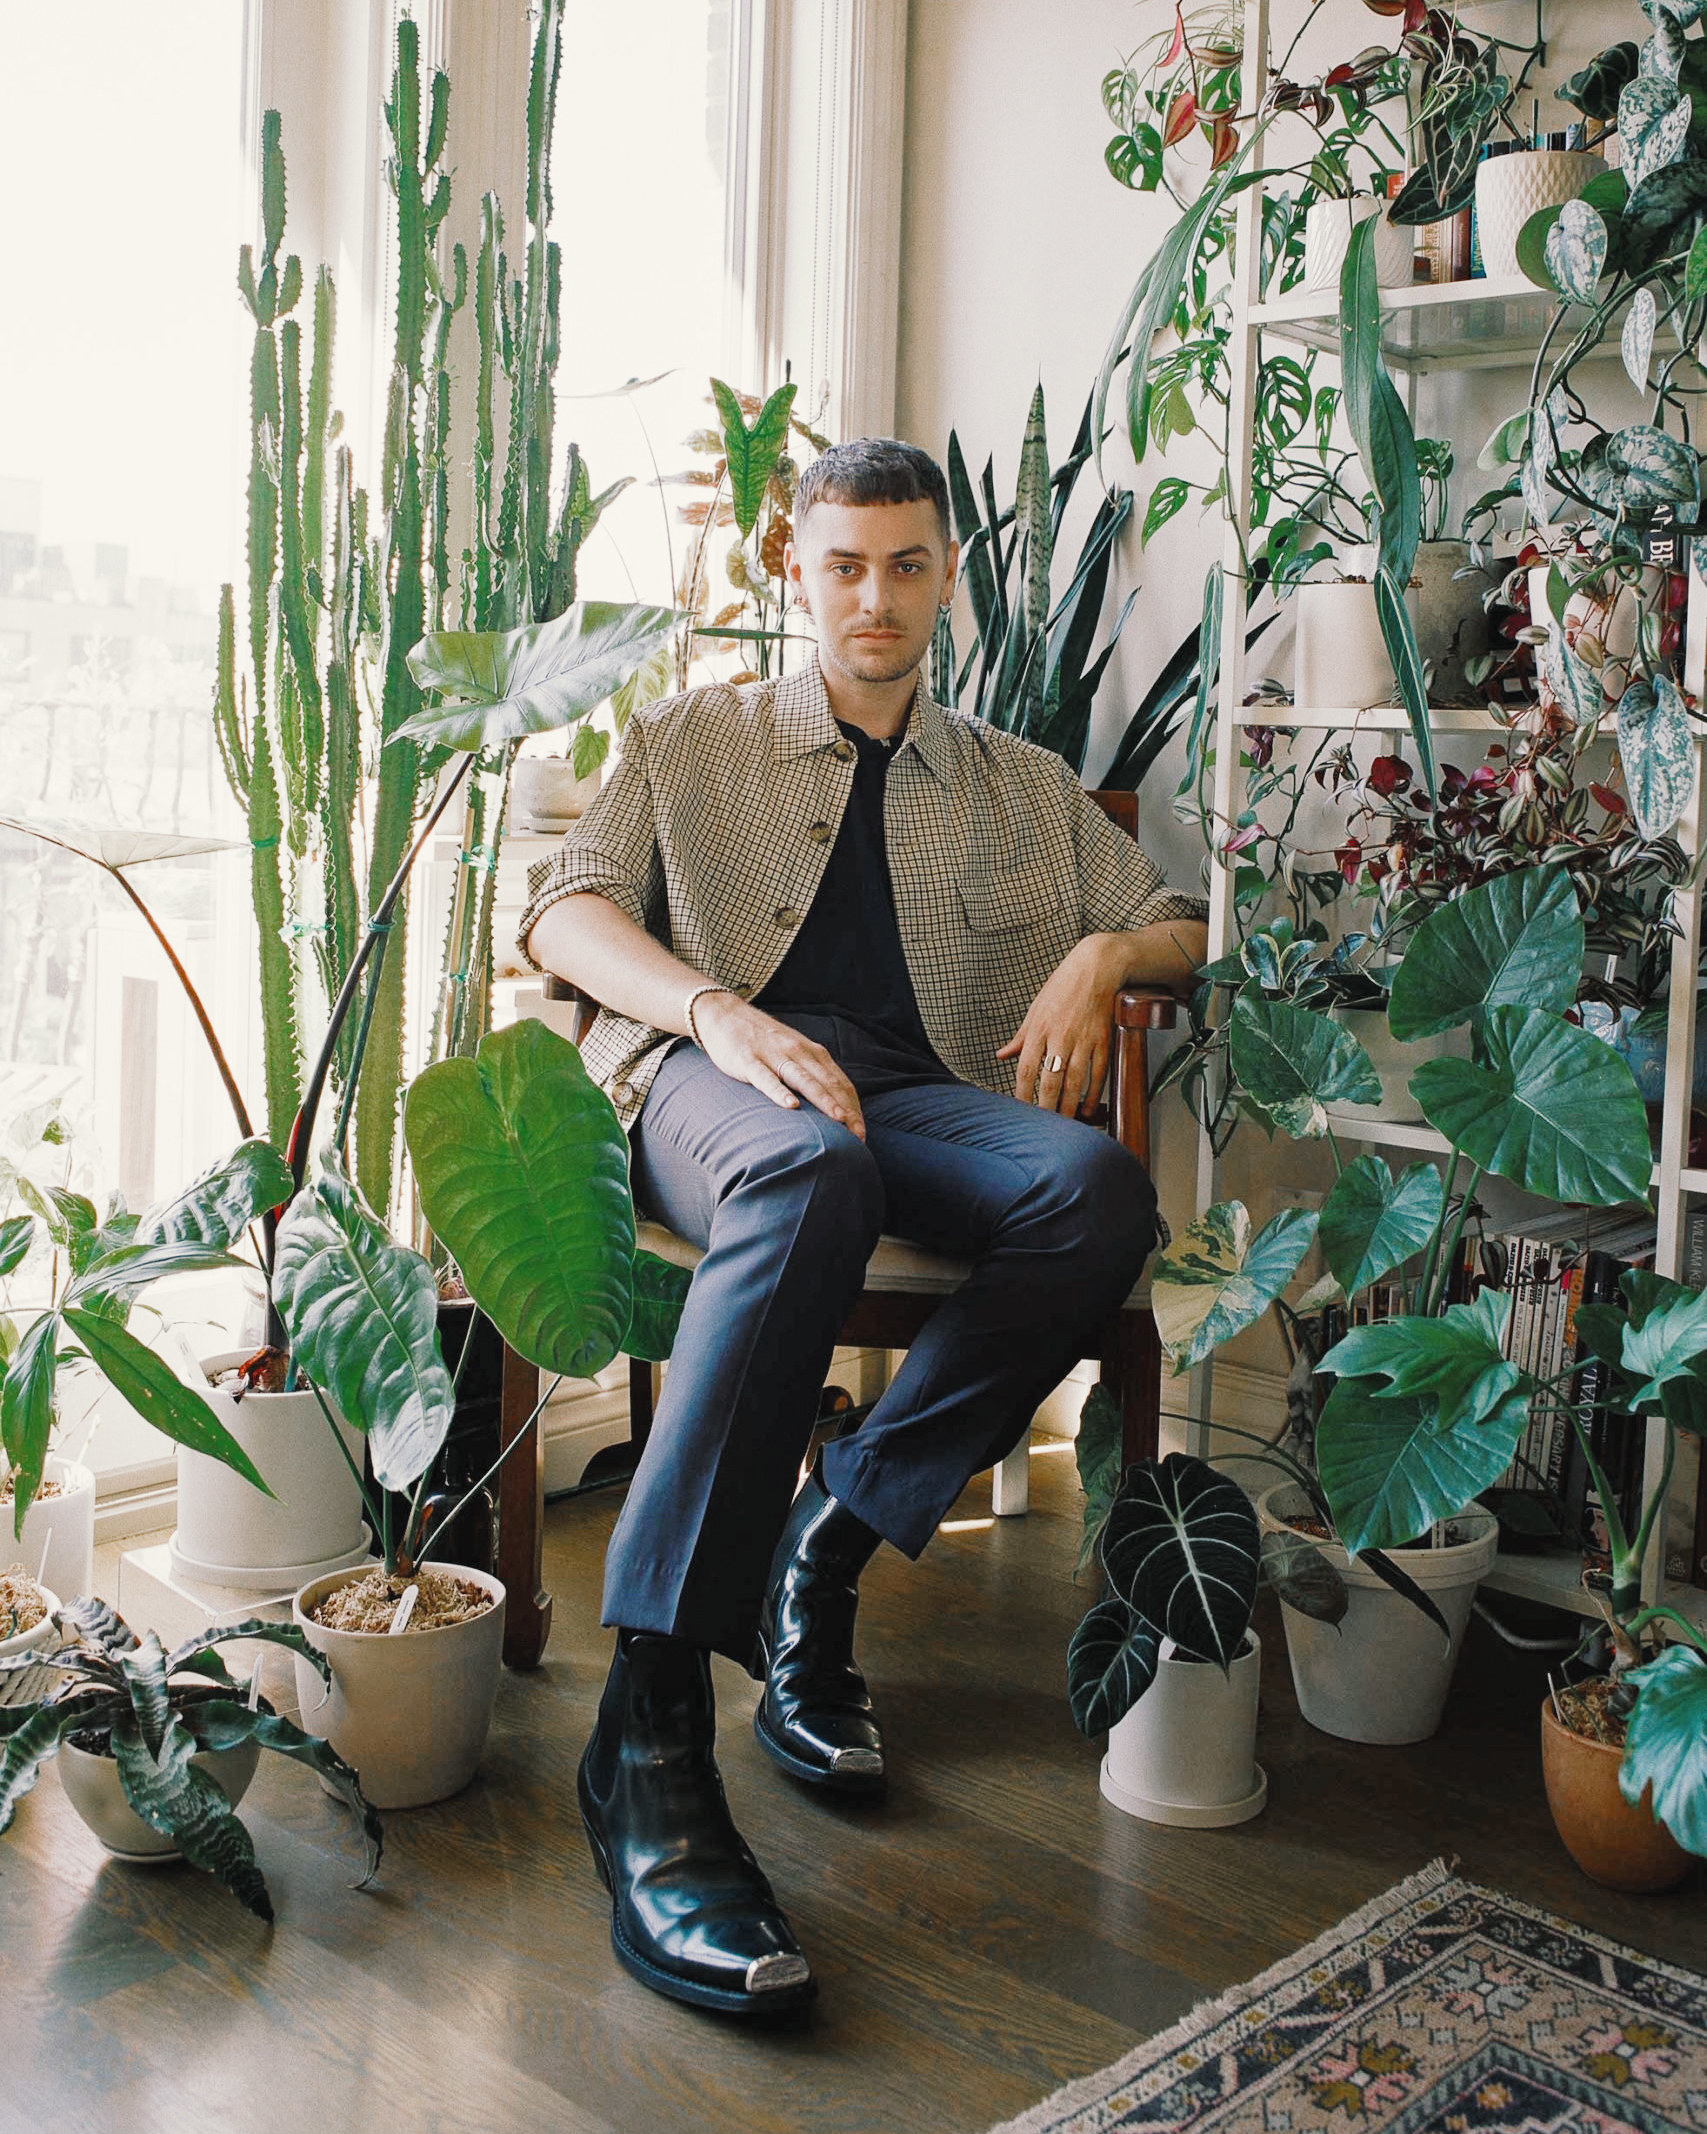 Eric White sits in a chair amid plants